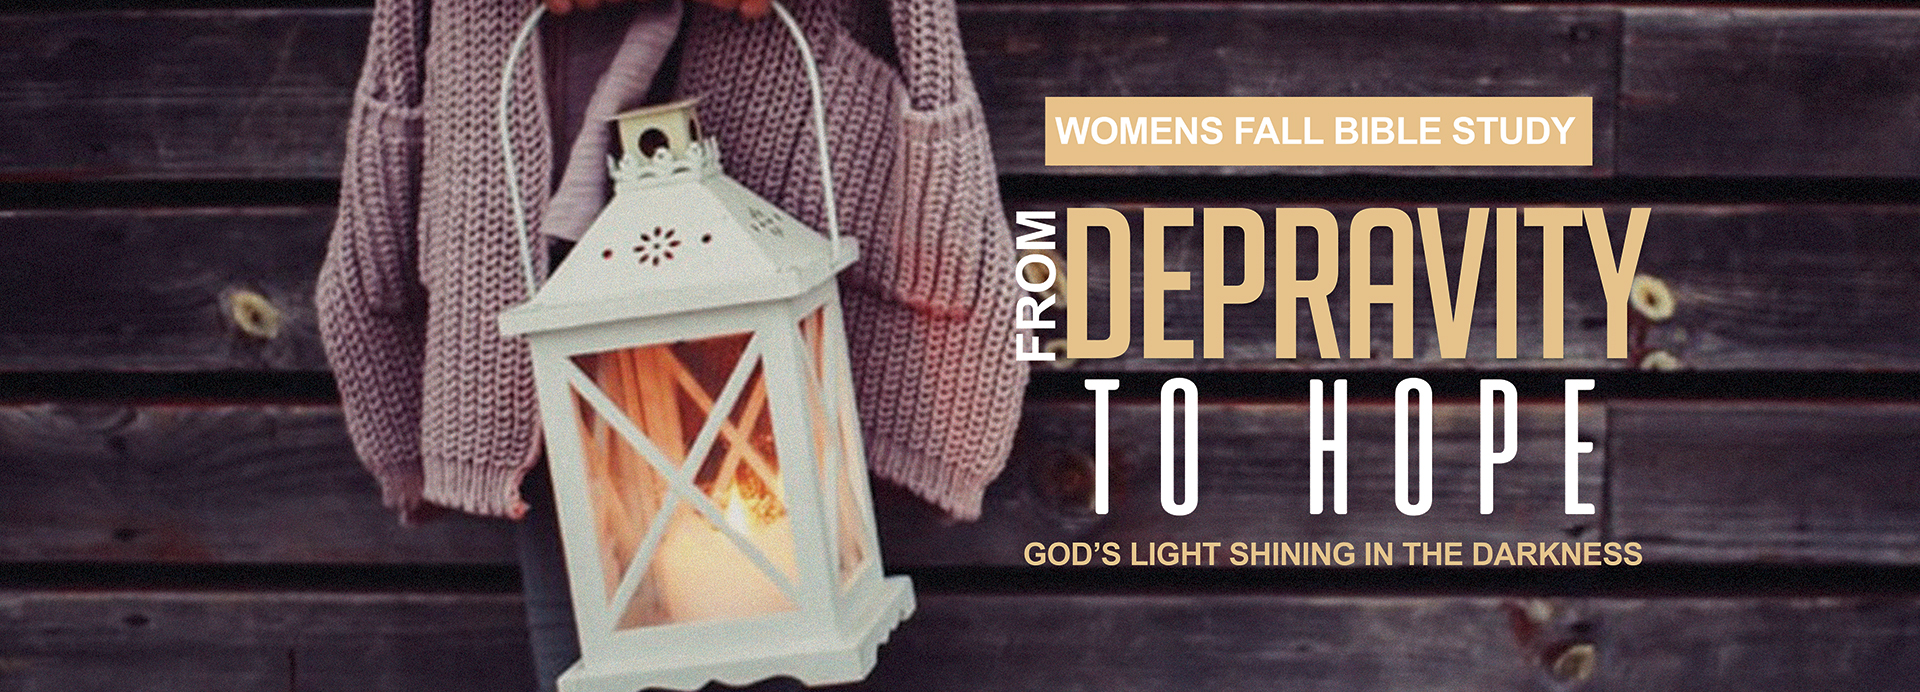 From Depravity to Hope - God’s Light Shining in the Darkness